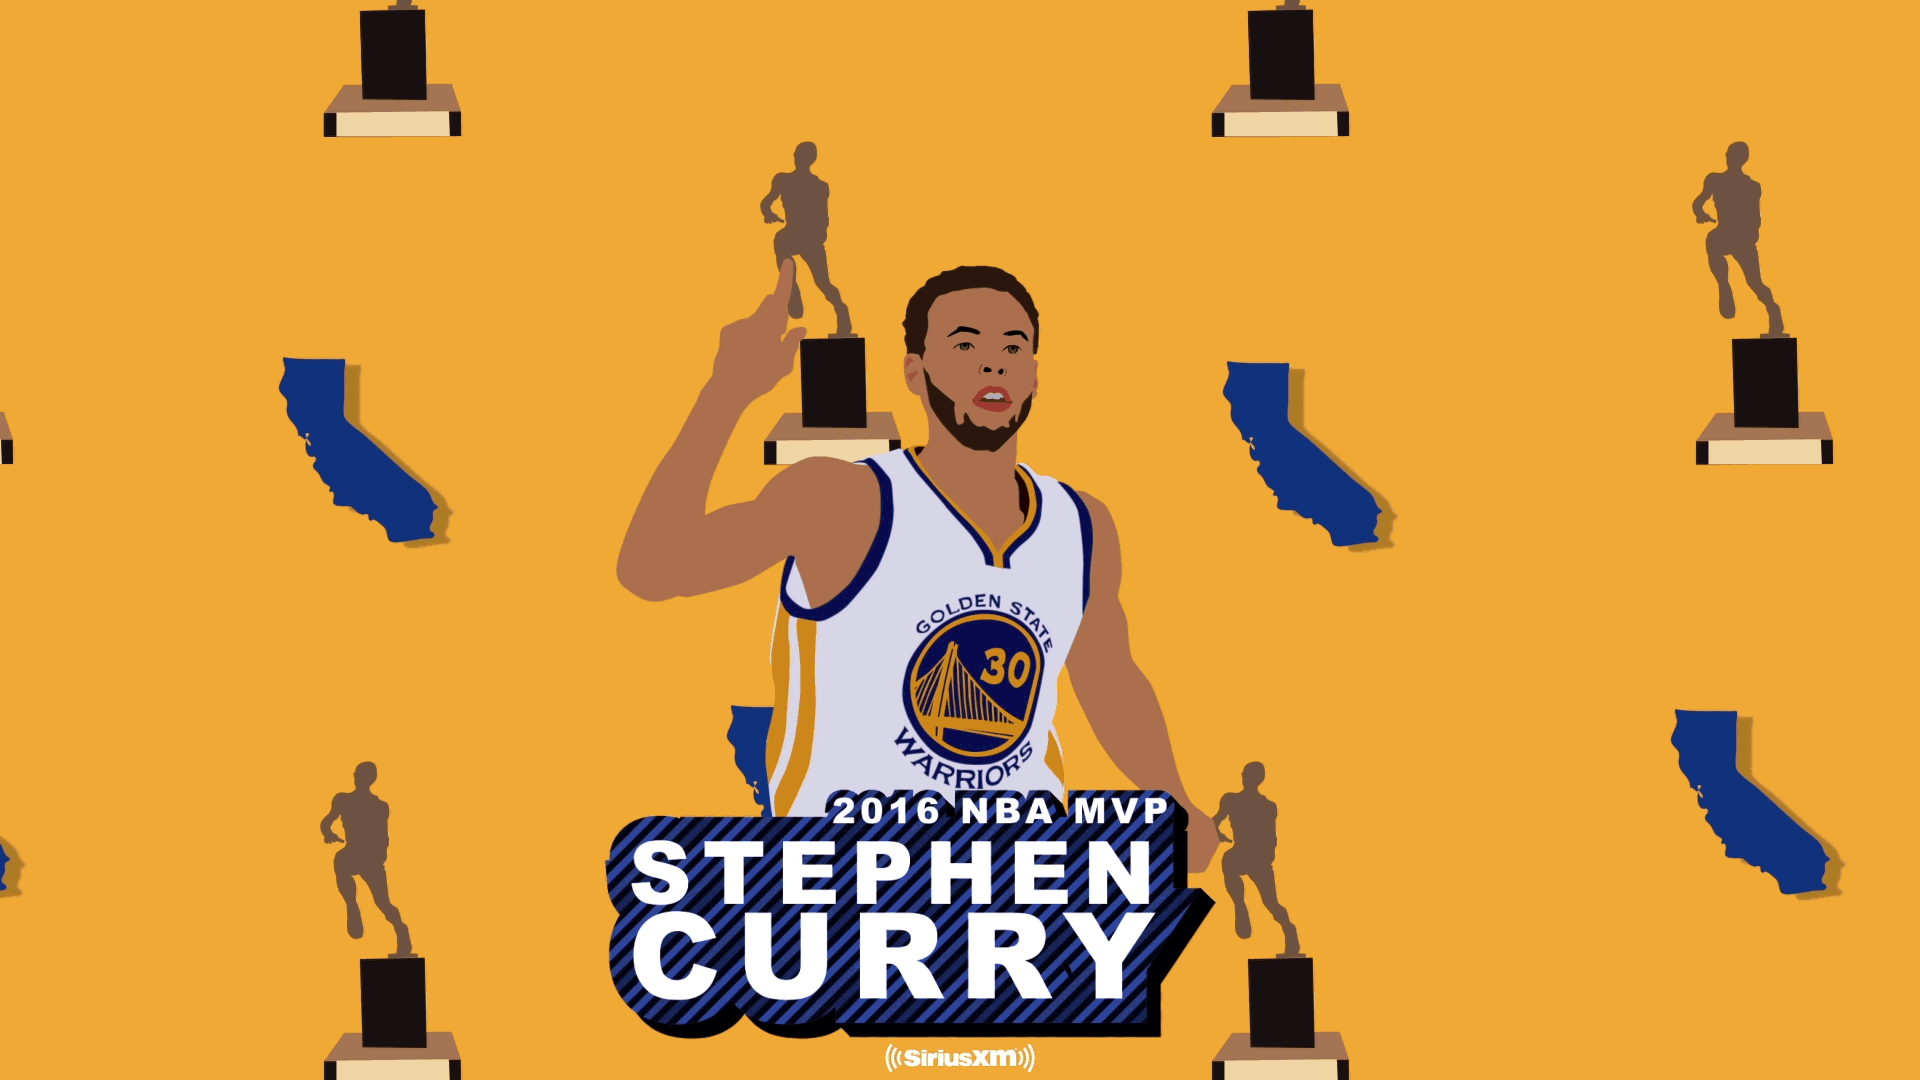 Stephen Curry Animated / Cartoon Stephen Curry Wallpapers Top Free